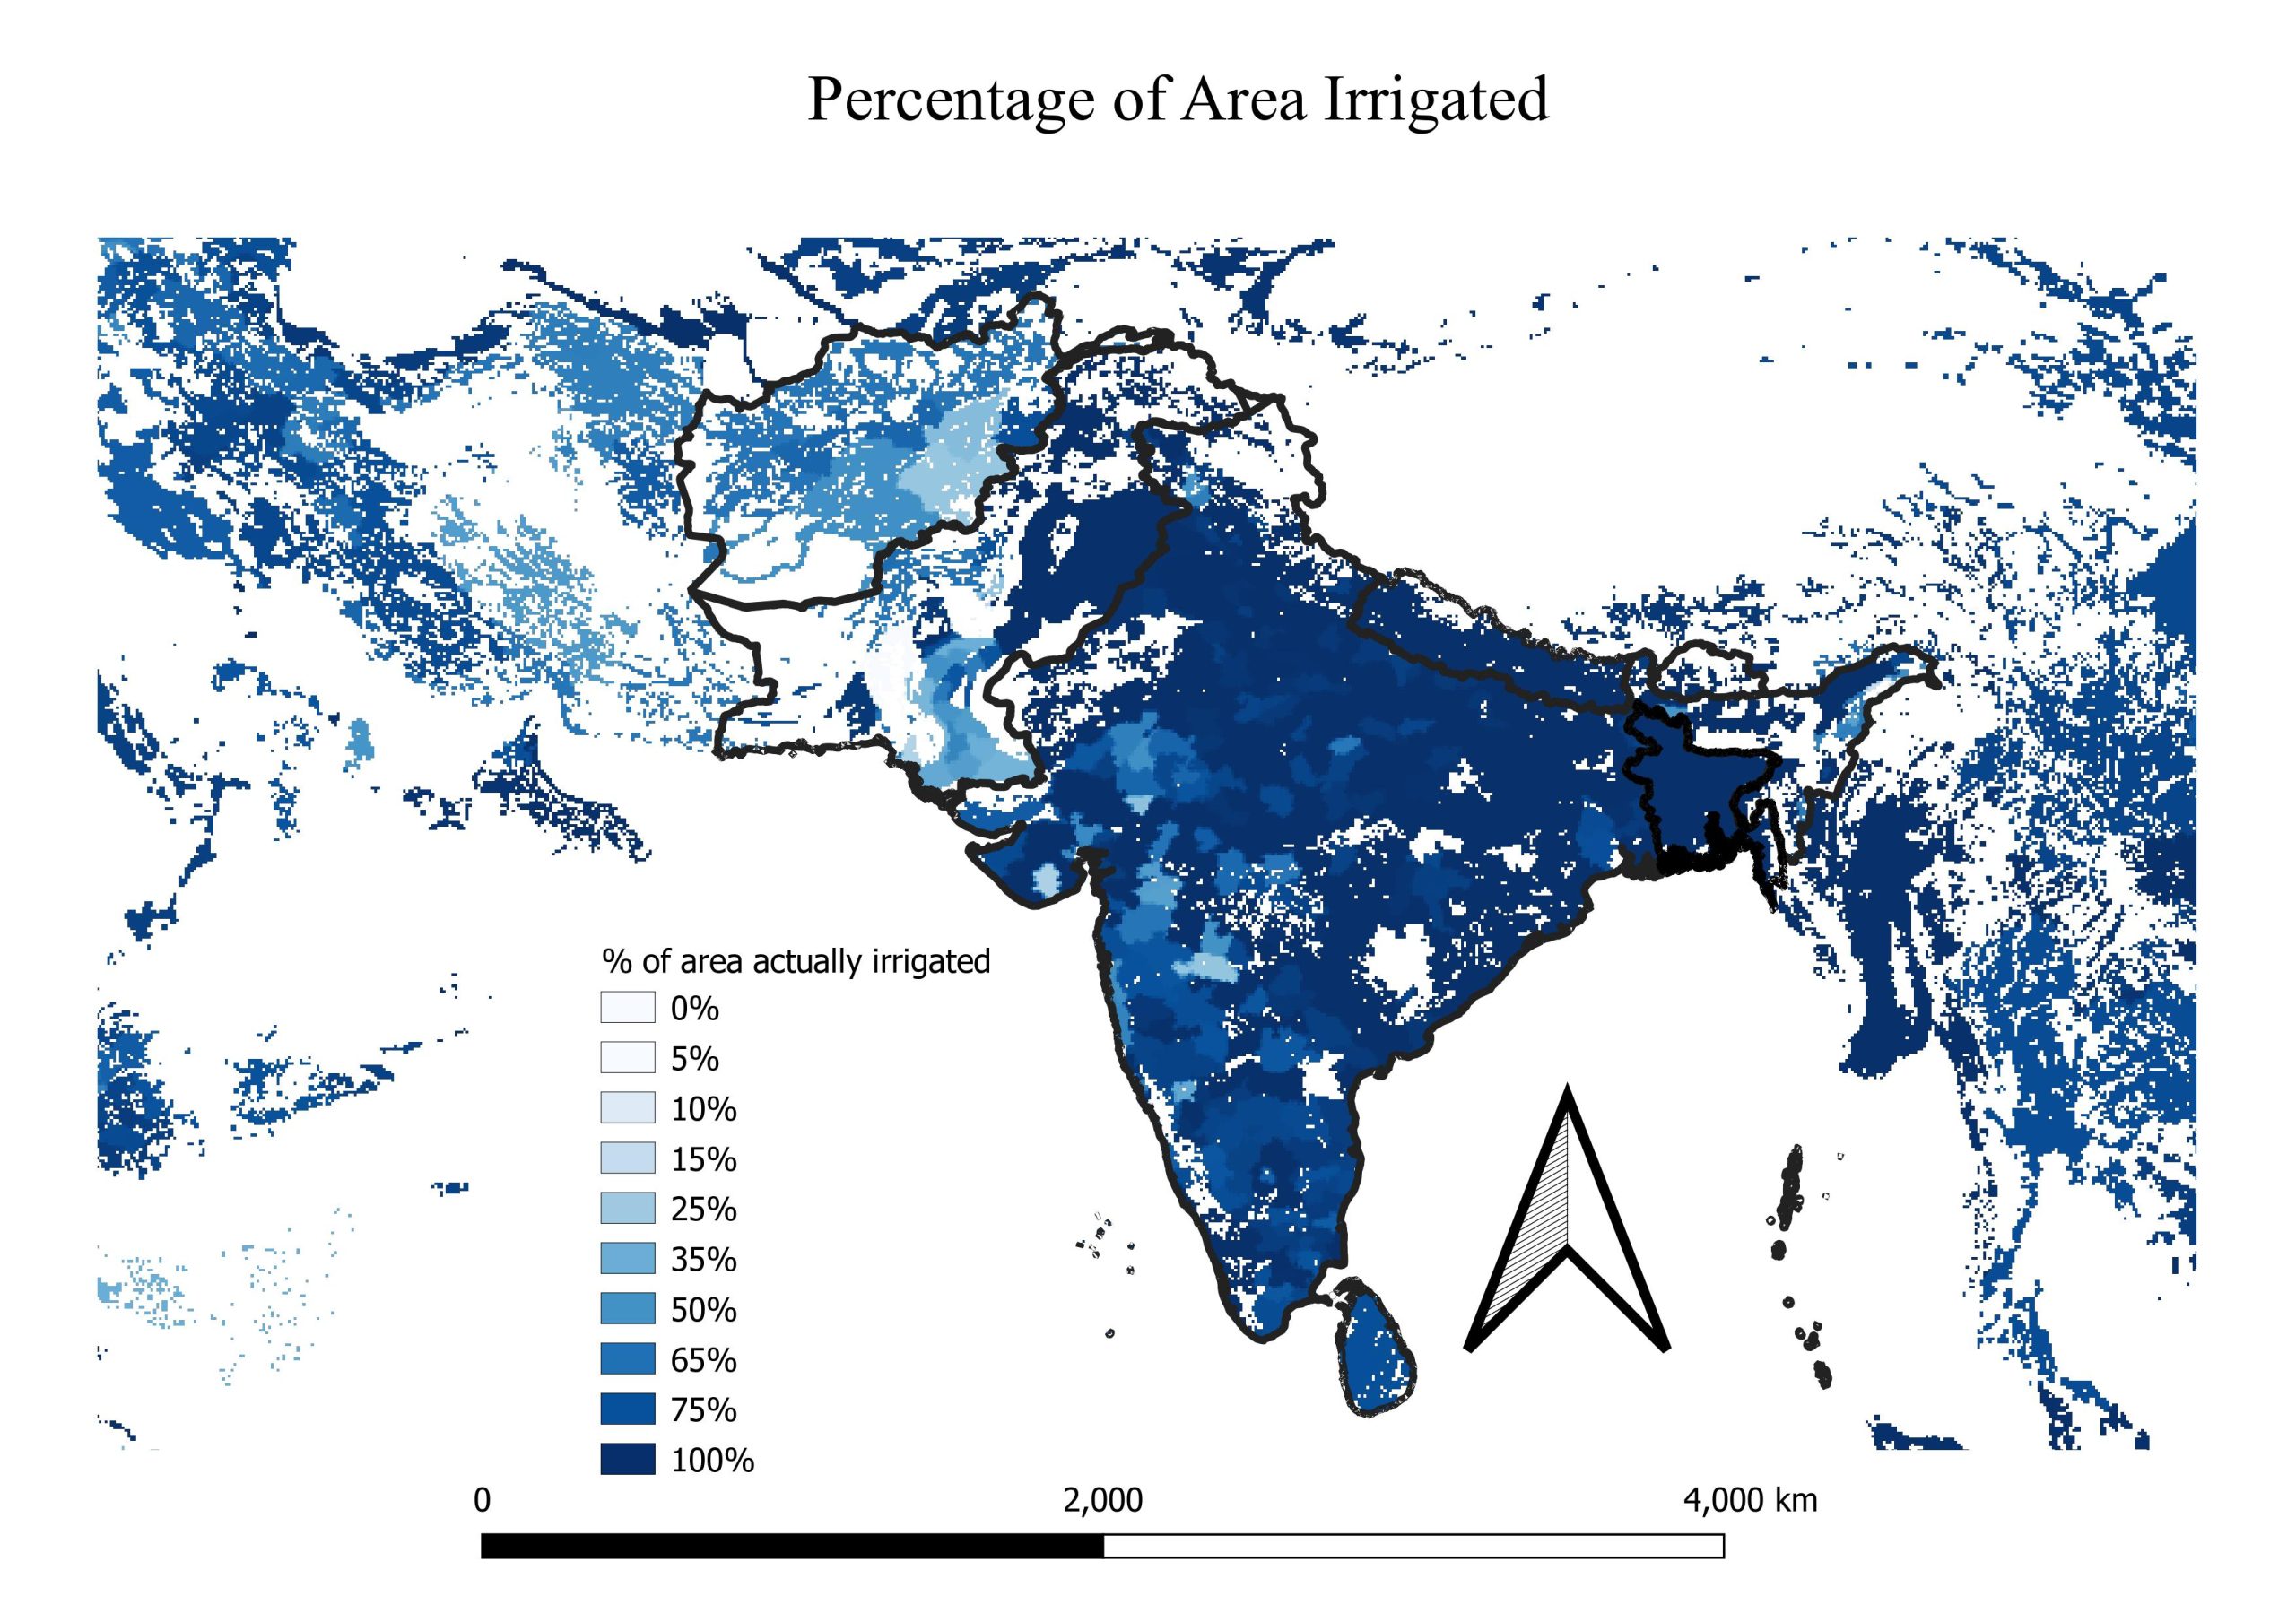 Map showing the percentage of irrigation in India and Pakistan, with Punjab being the most widely irrigated province in Pakistan, and most of India being highly irrigated other than stretches of land in Rajasthan, Gujarat, Kerala, Andhra Pradesh, Assam, Manipur and Nagaland states. 